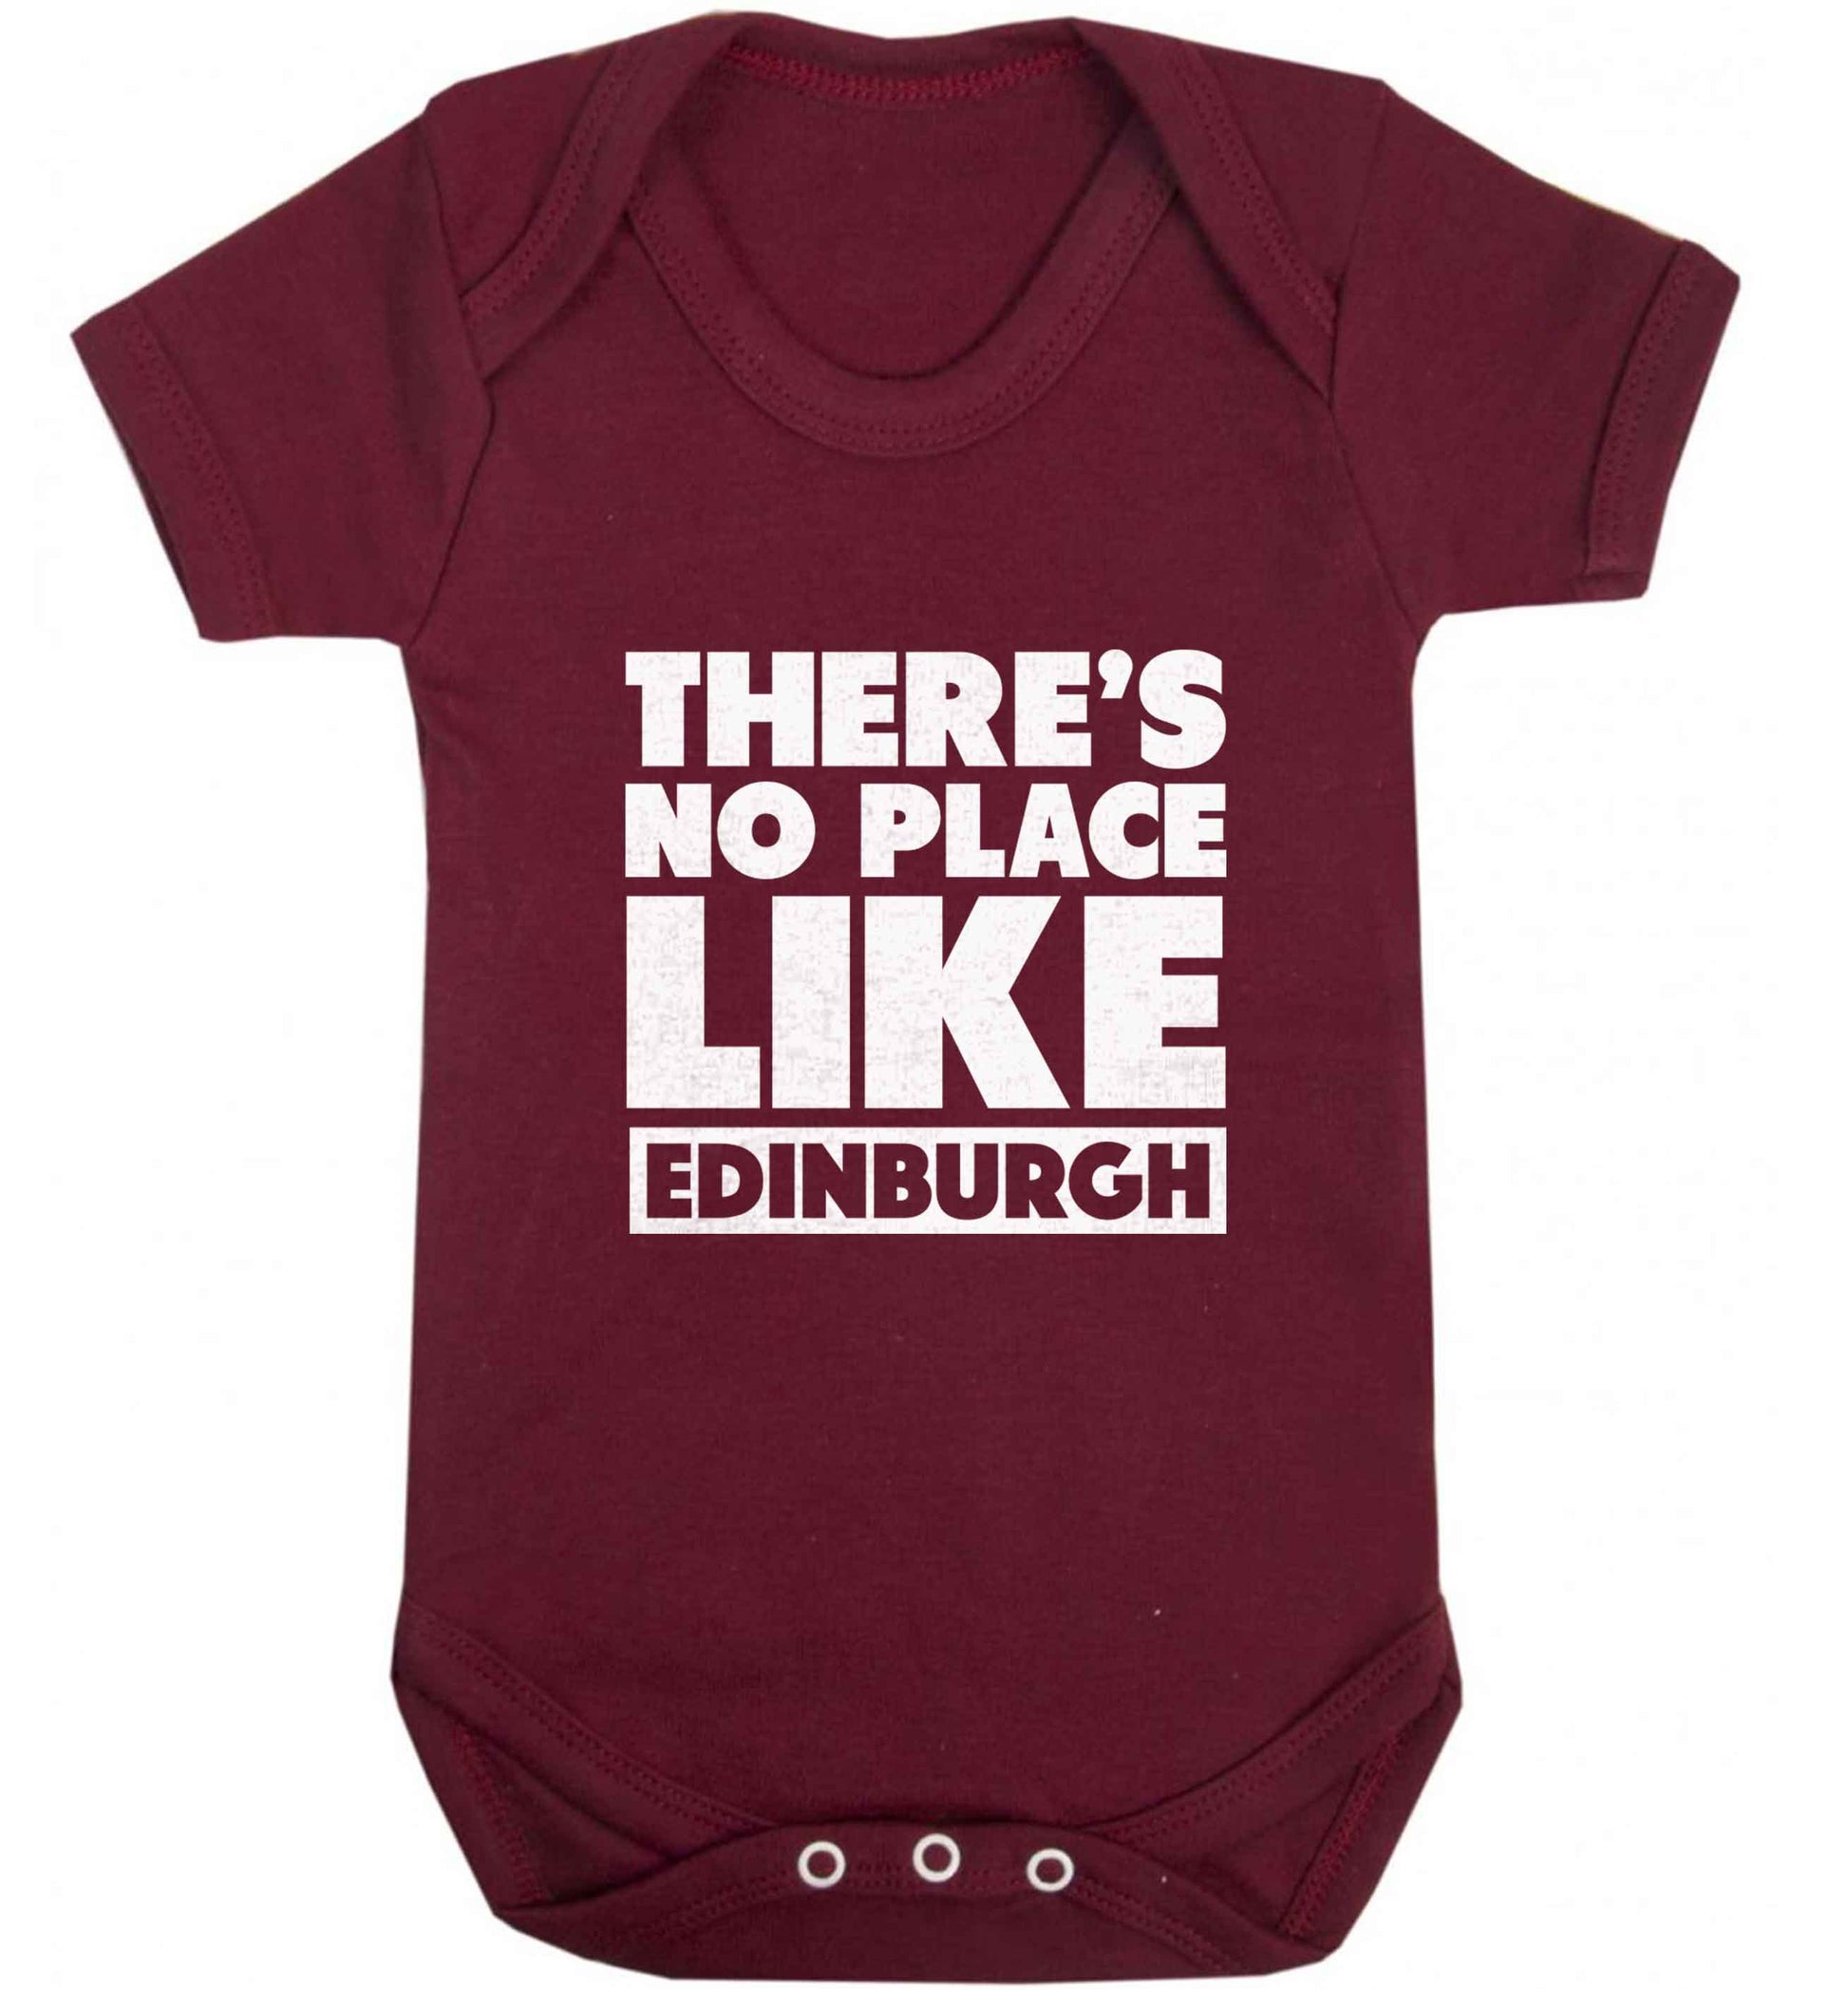 There's no place like Edinburgh baby vest maroon 18-24 months